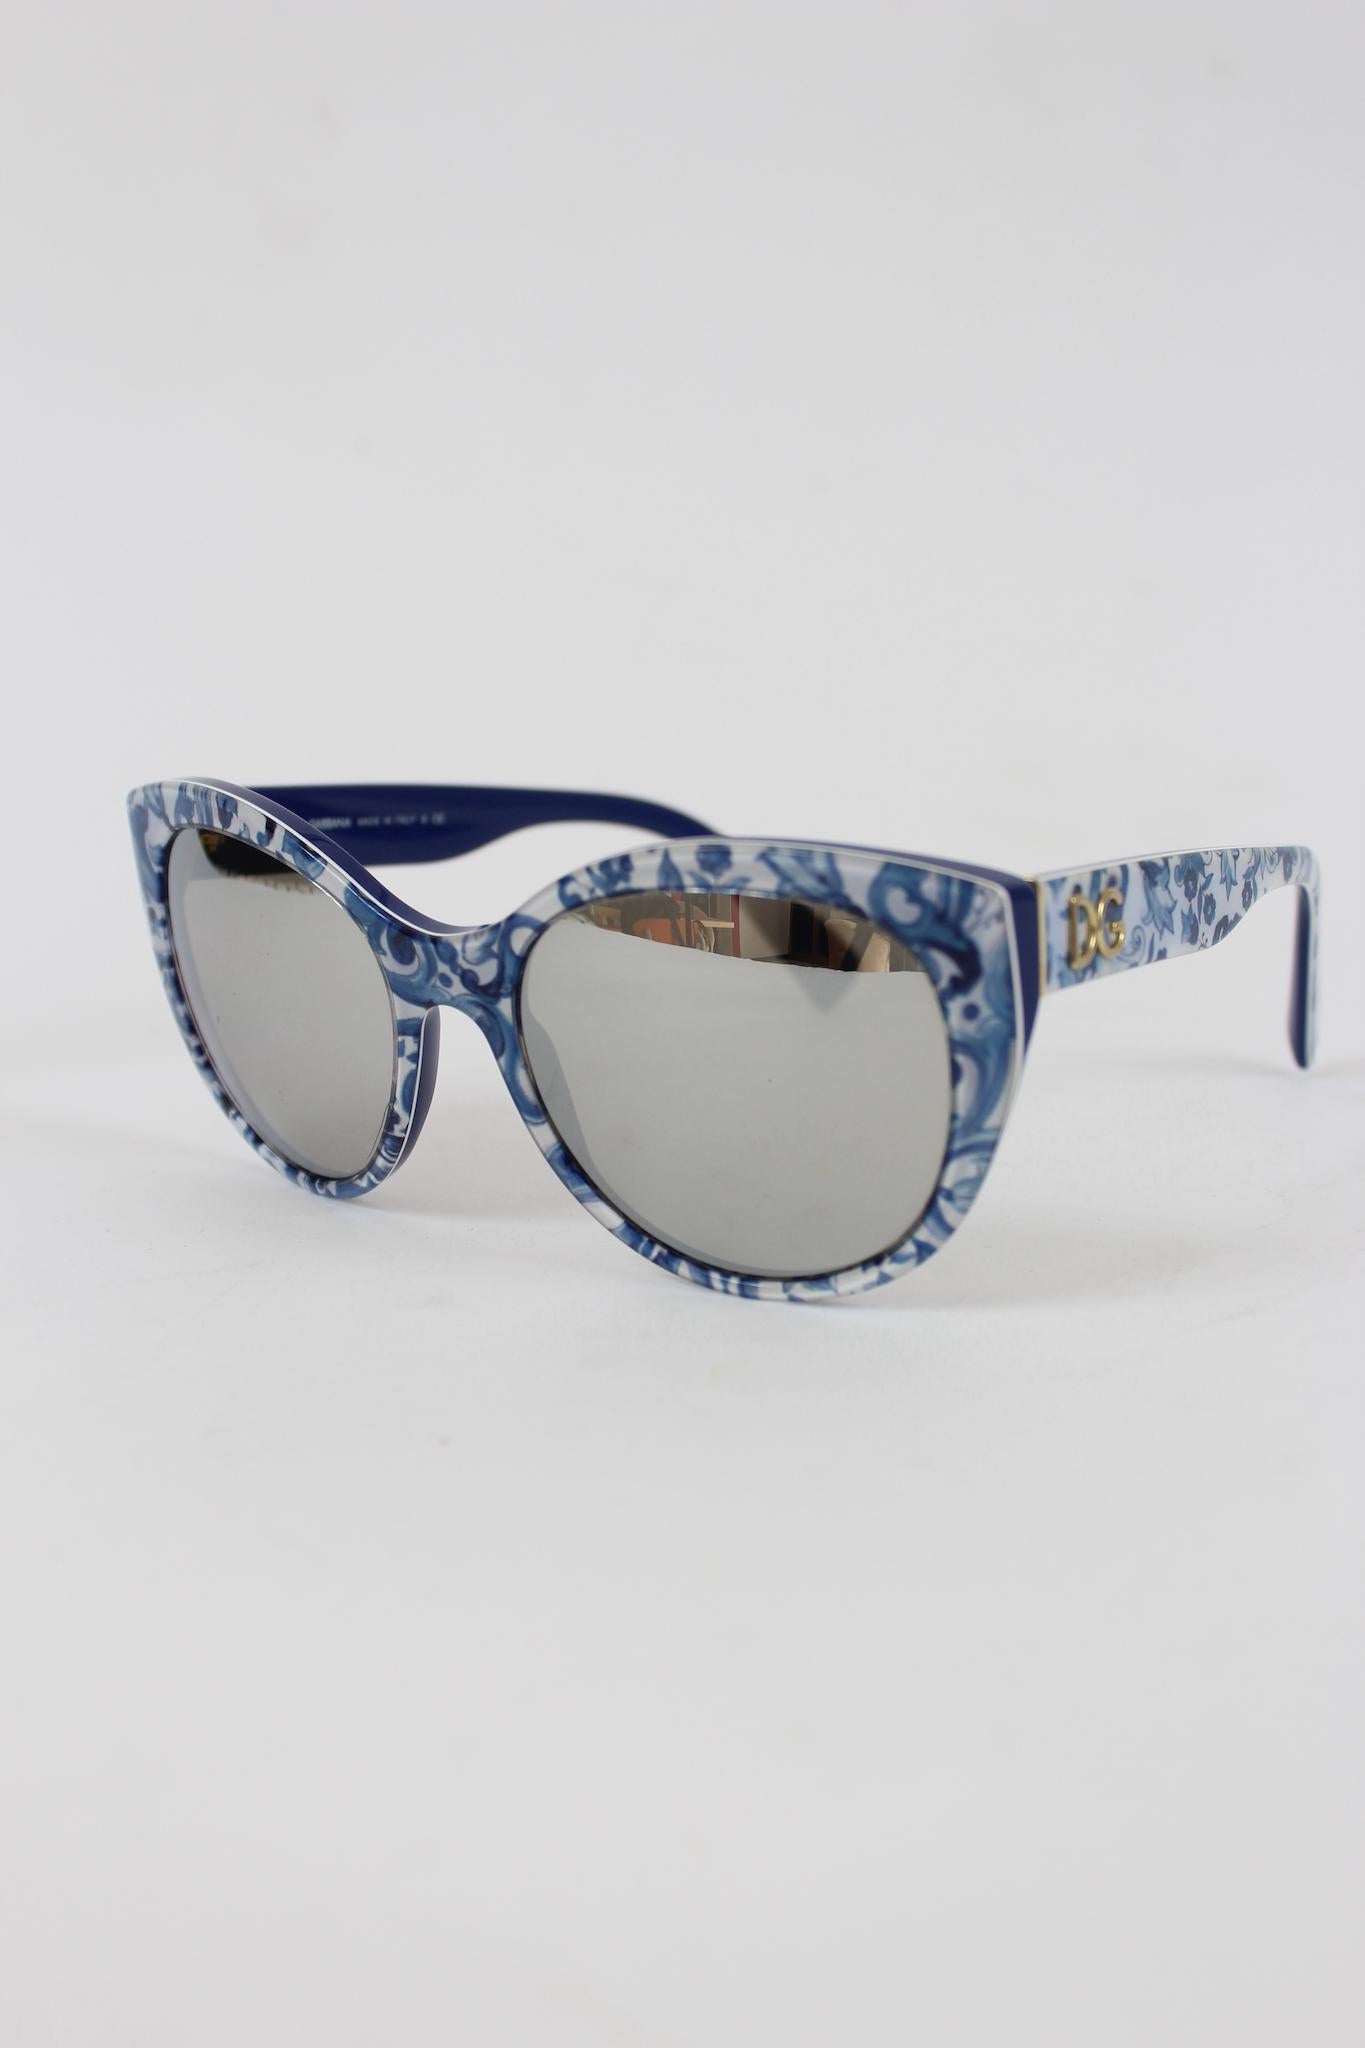 Dolce & Gabbana 2000s sunglasses. White and blue color with floral designs, silver mirrored lenses. Made in Italy.

Code: DG 4217 2993 / 6G

Bridge: 135 mm
Temple length: 140 mm
Lens: 55 mm